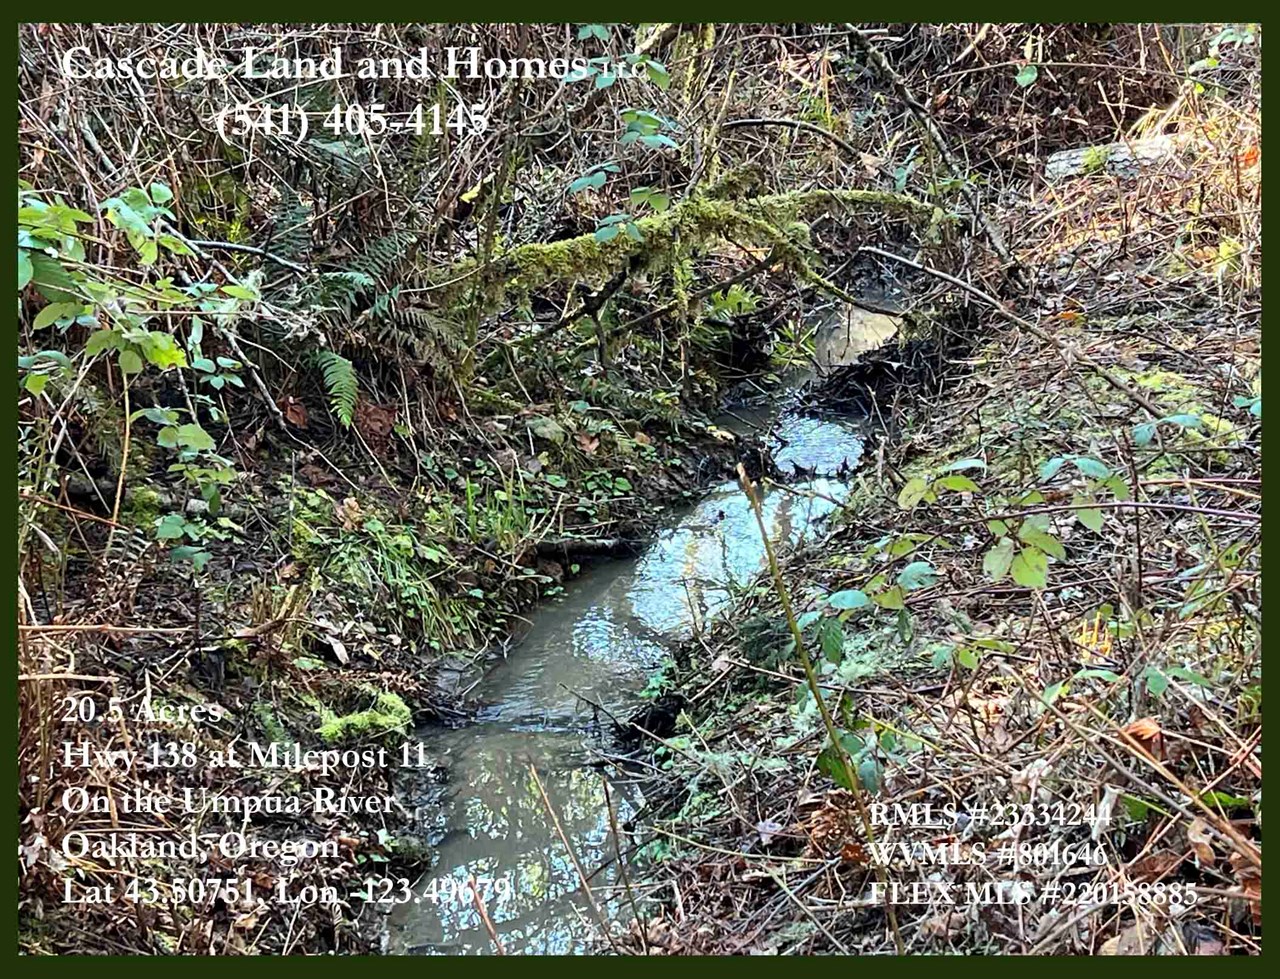 there is a seasonal creek on the property that empties into the umpqua river across the road from the property.